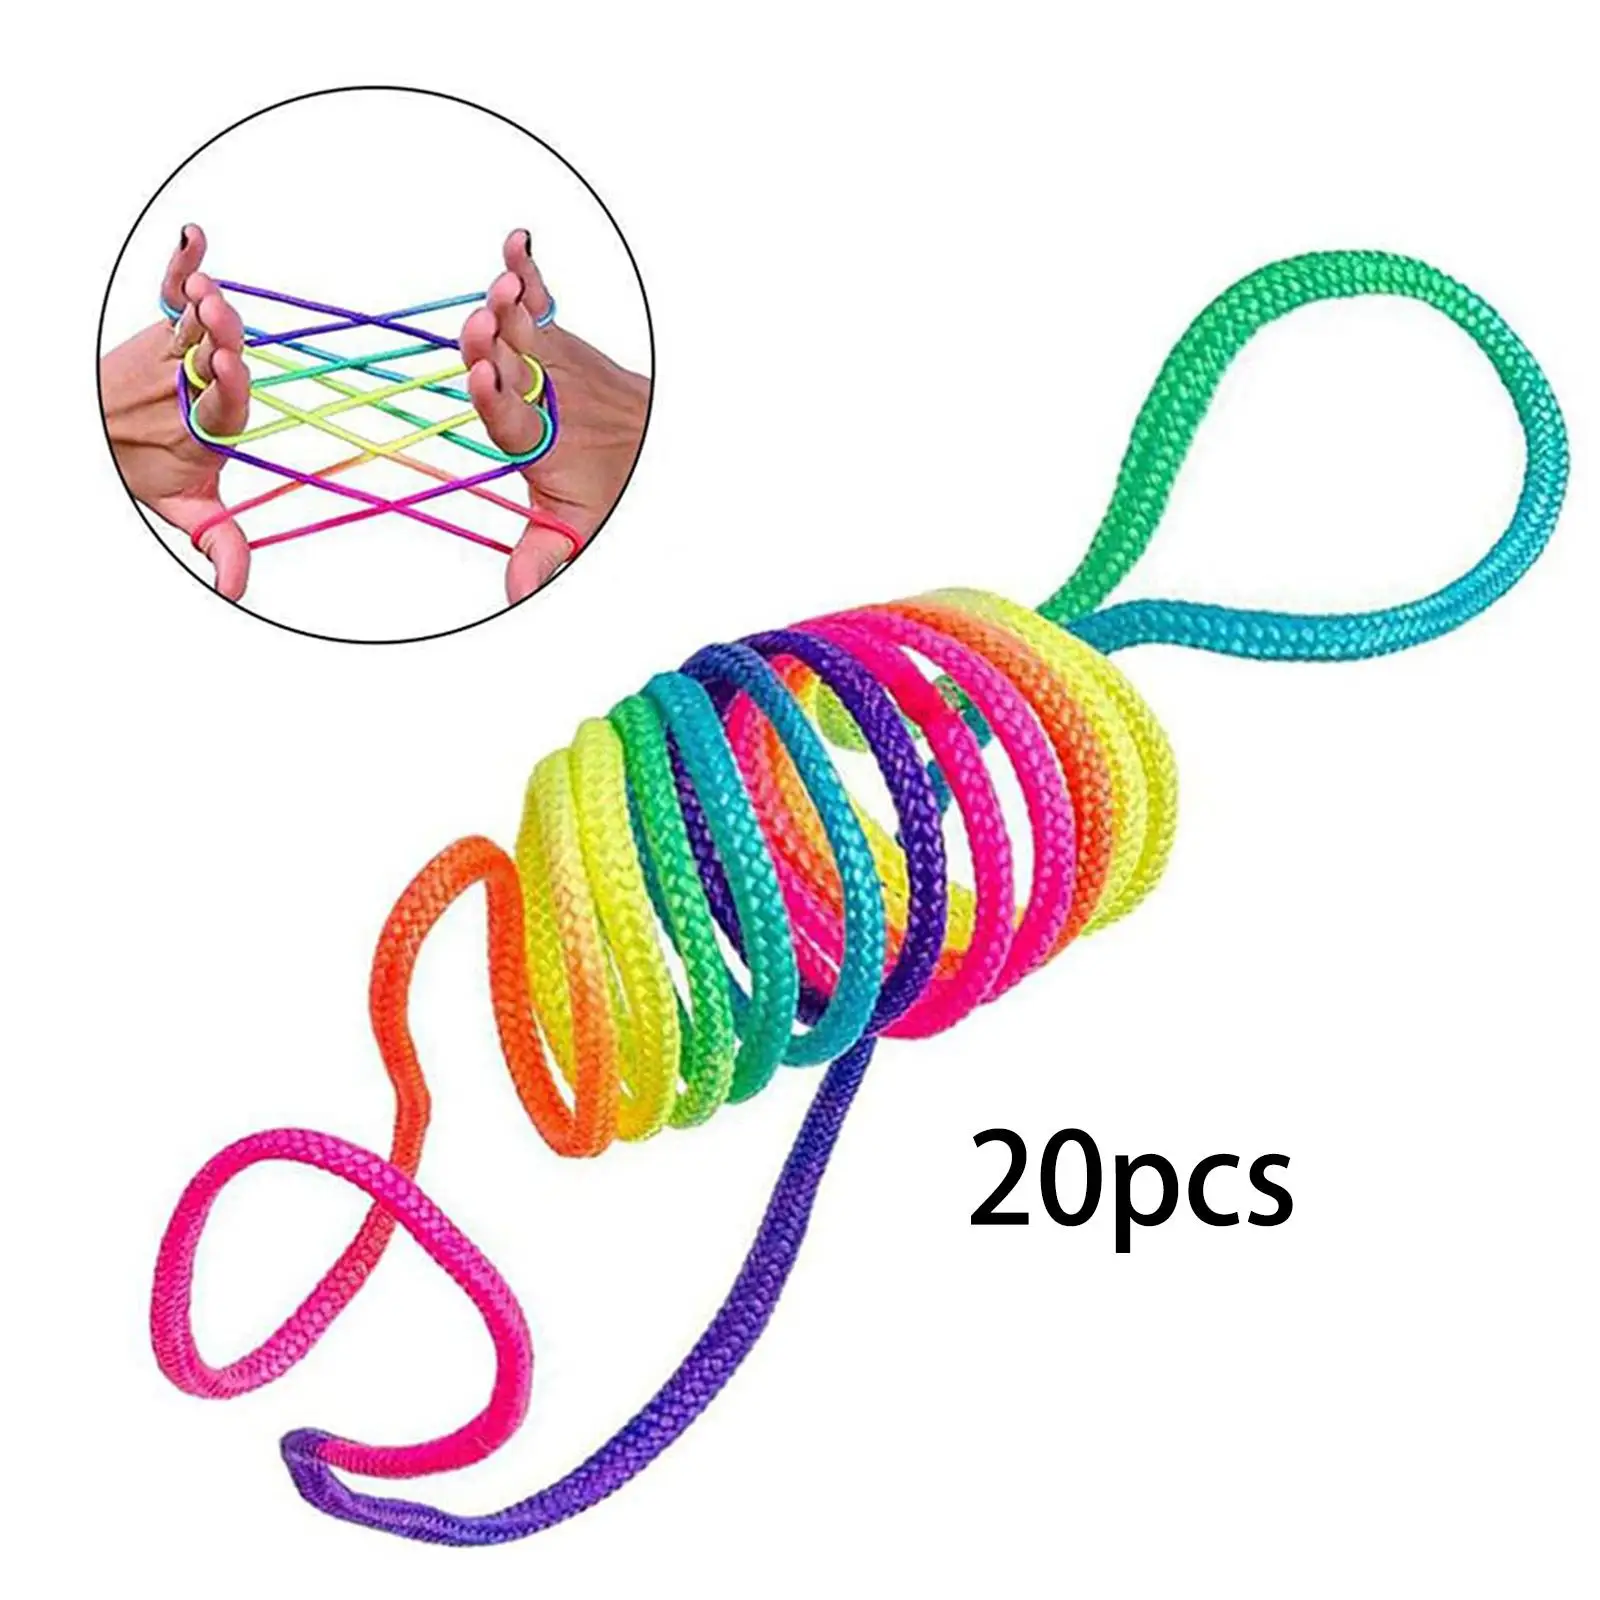 20x Rope Twist Game Development Toy Cord for Outdoor Activity Home Parties